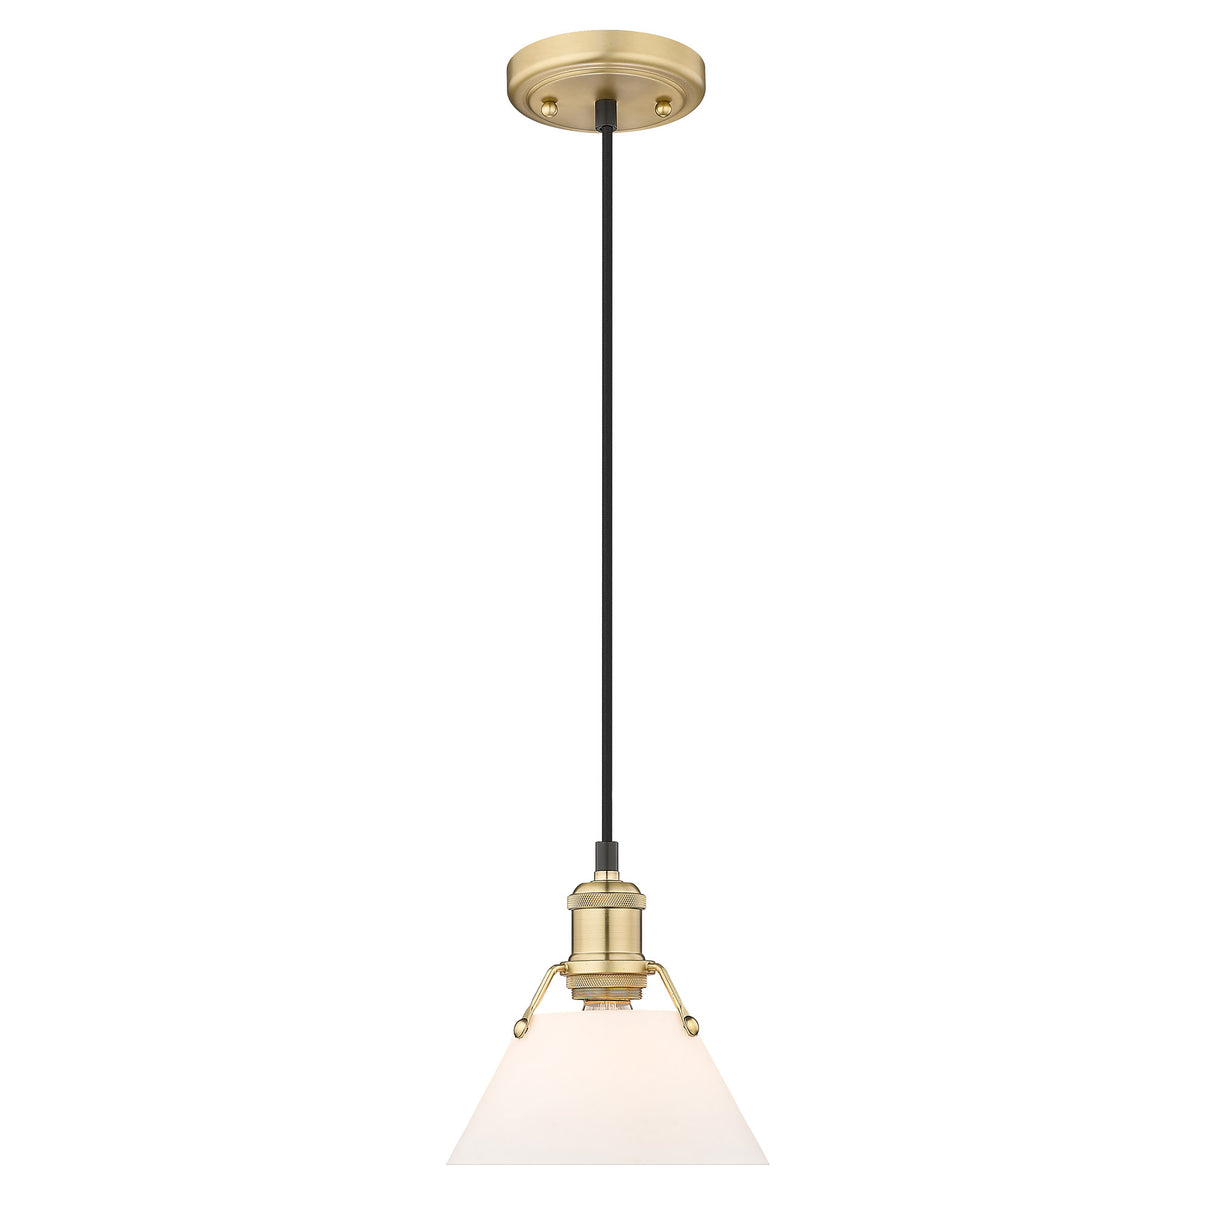 Orwell BCB Small Pendant in Brushed Champagne Bronze with Opal Glass Shade